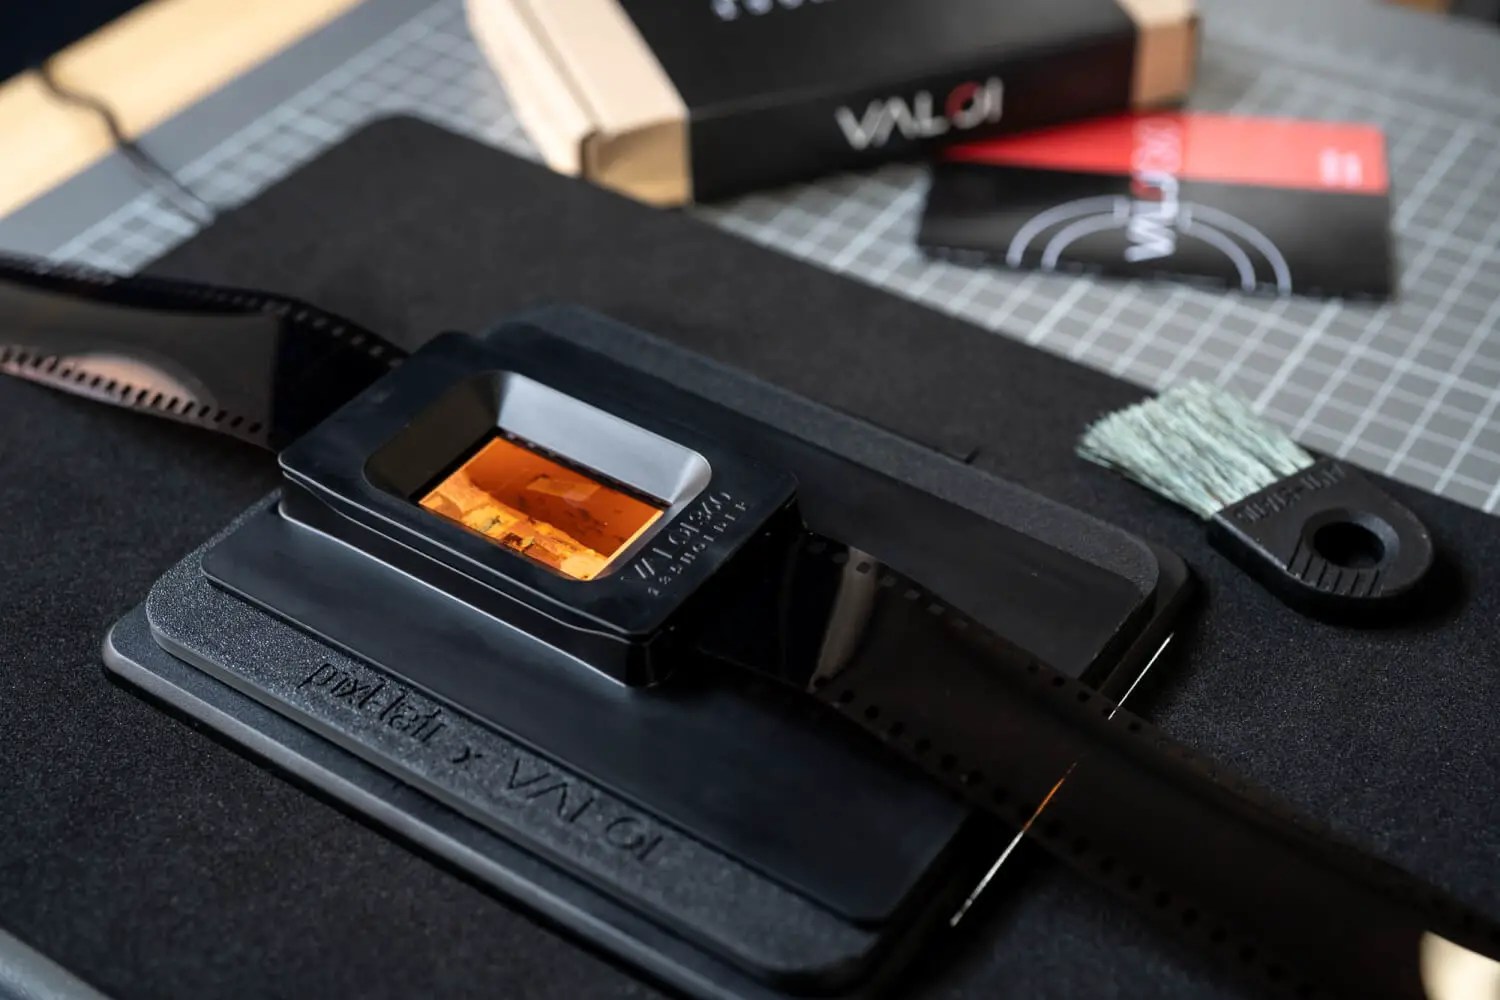 The pixl-latr x VALOI adapter: Get more for your film “scanning” buck